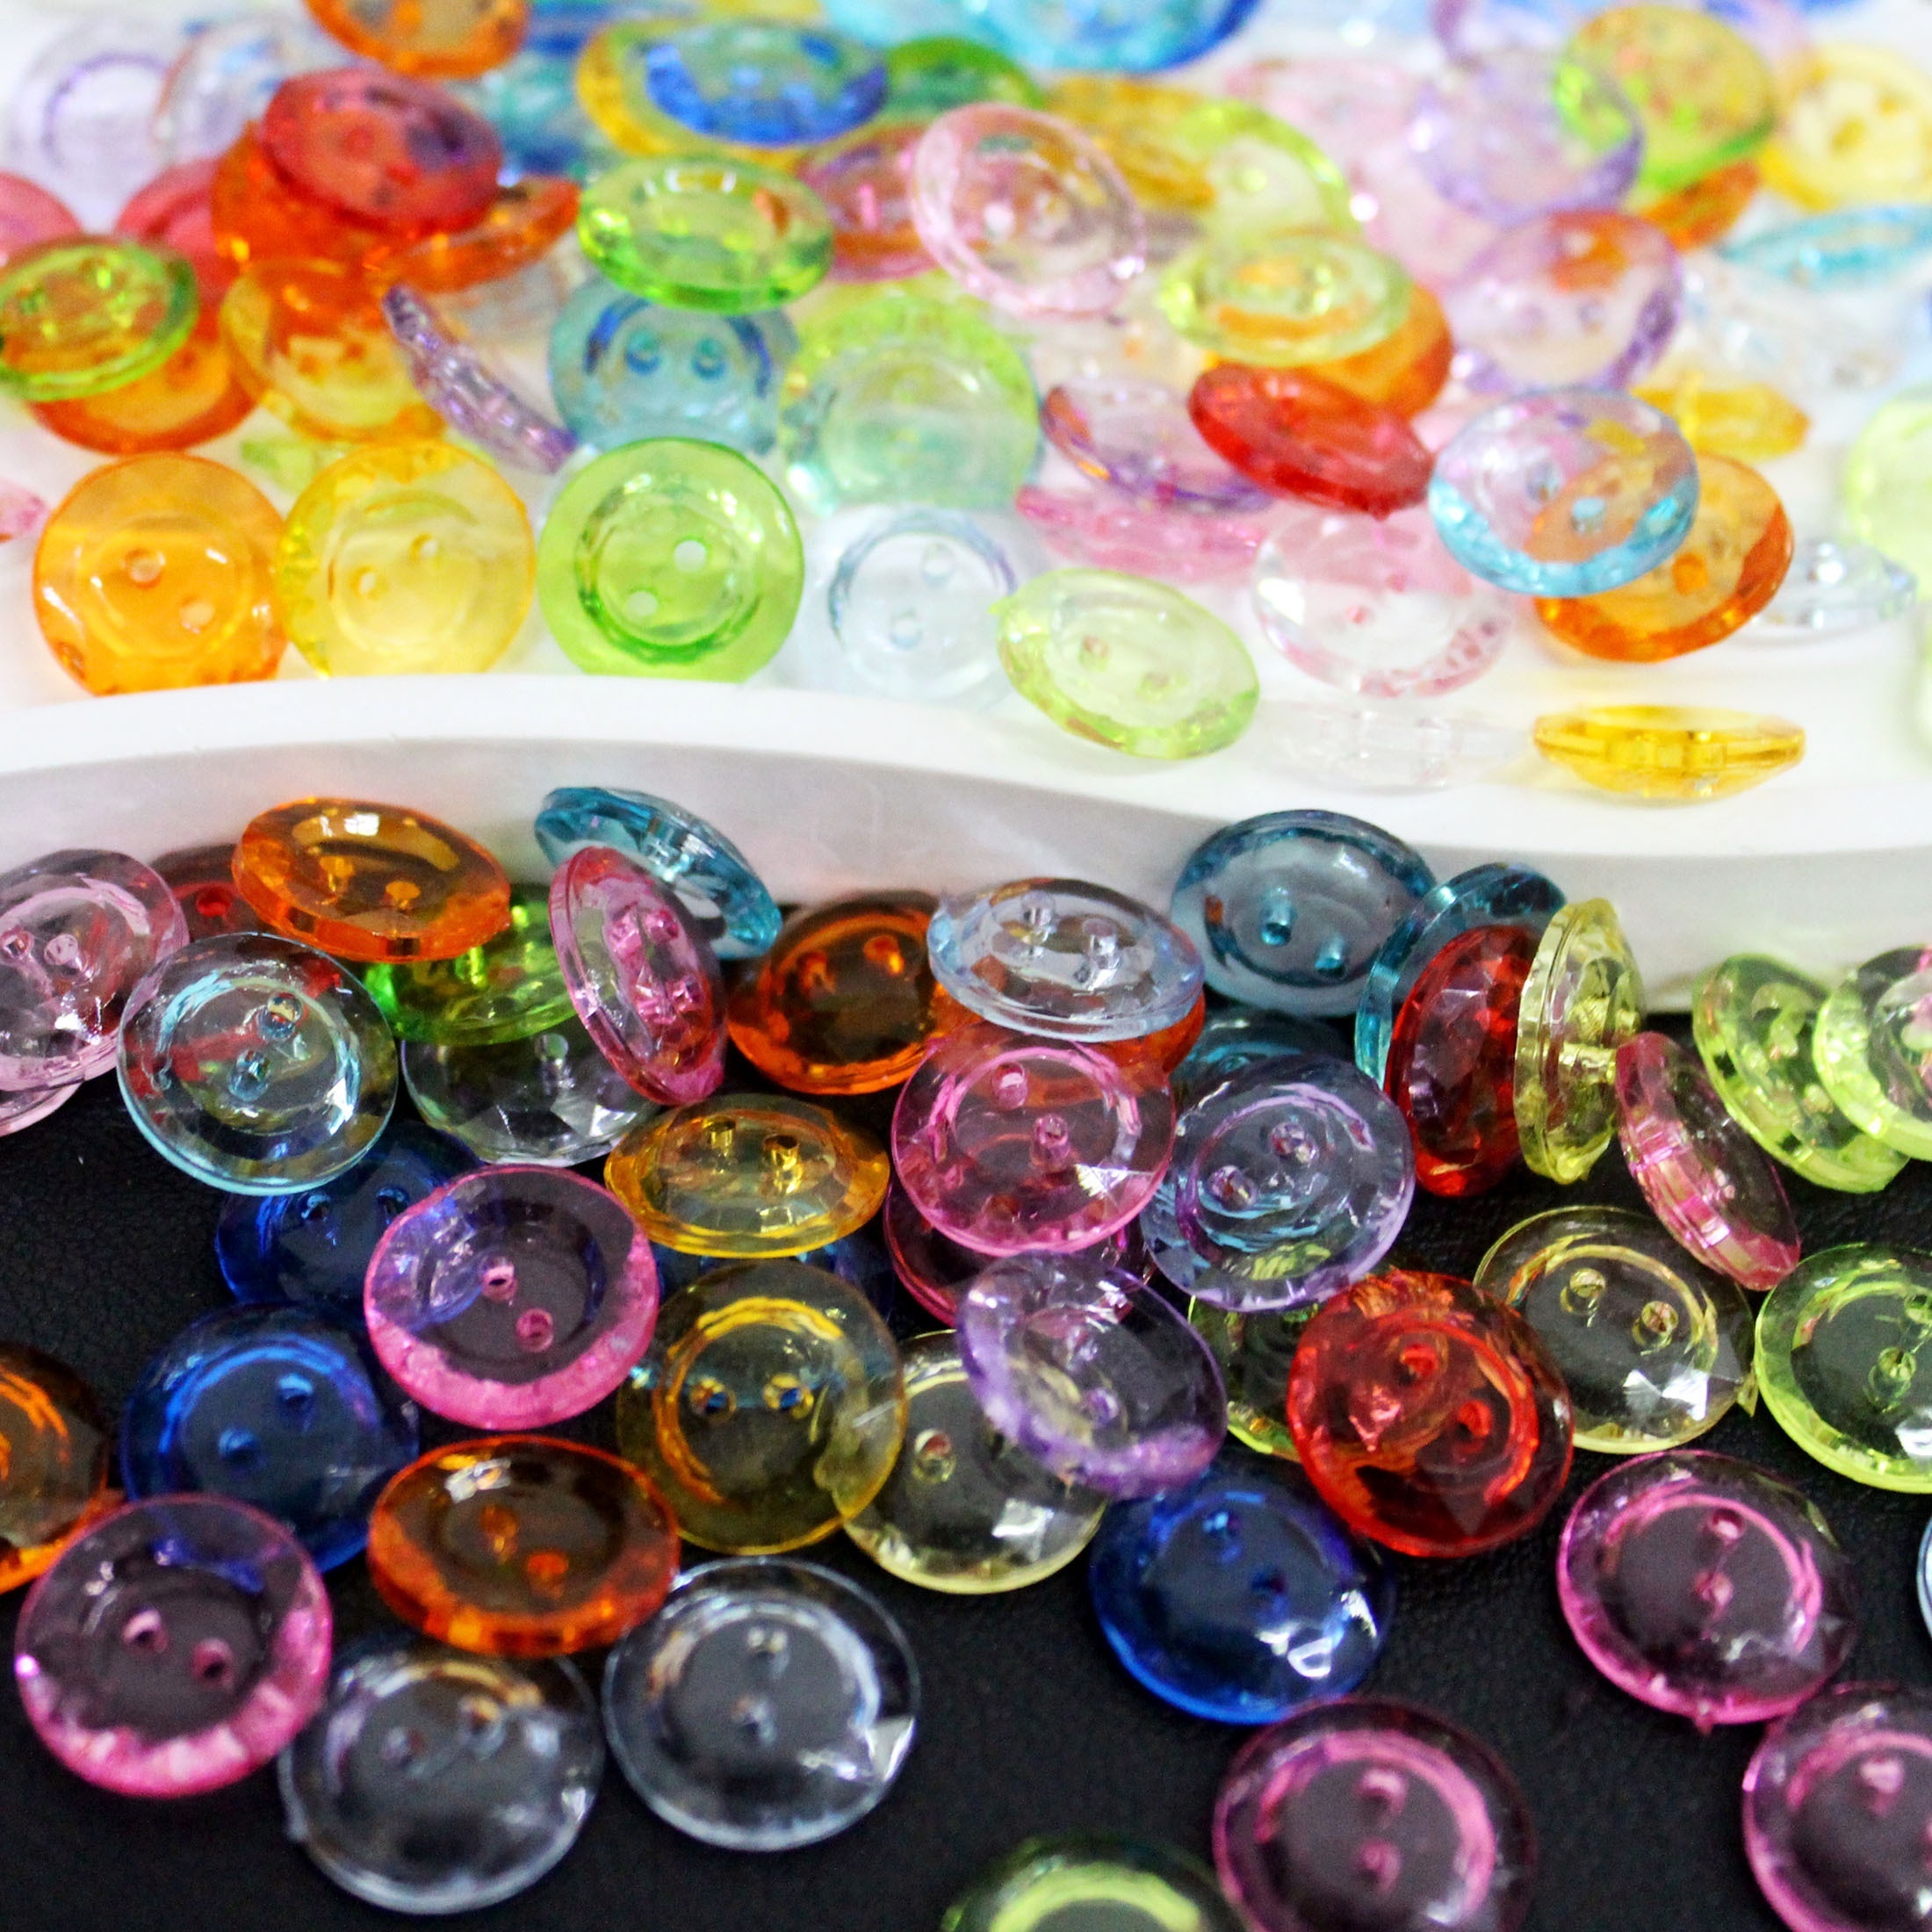 

50pcs/pack 13mm Mixed Color Random Two-eye Plastic Crystal Buckle Shirt Button Buckle Diy Handmade Clothing Sewing Accessories Accessories